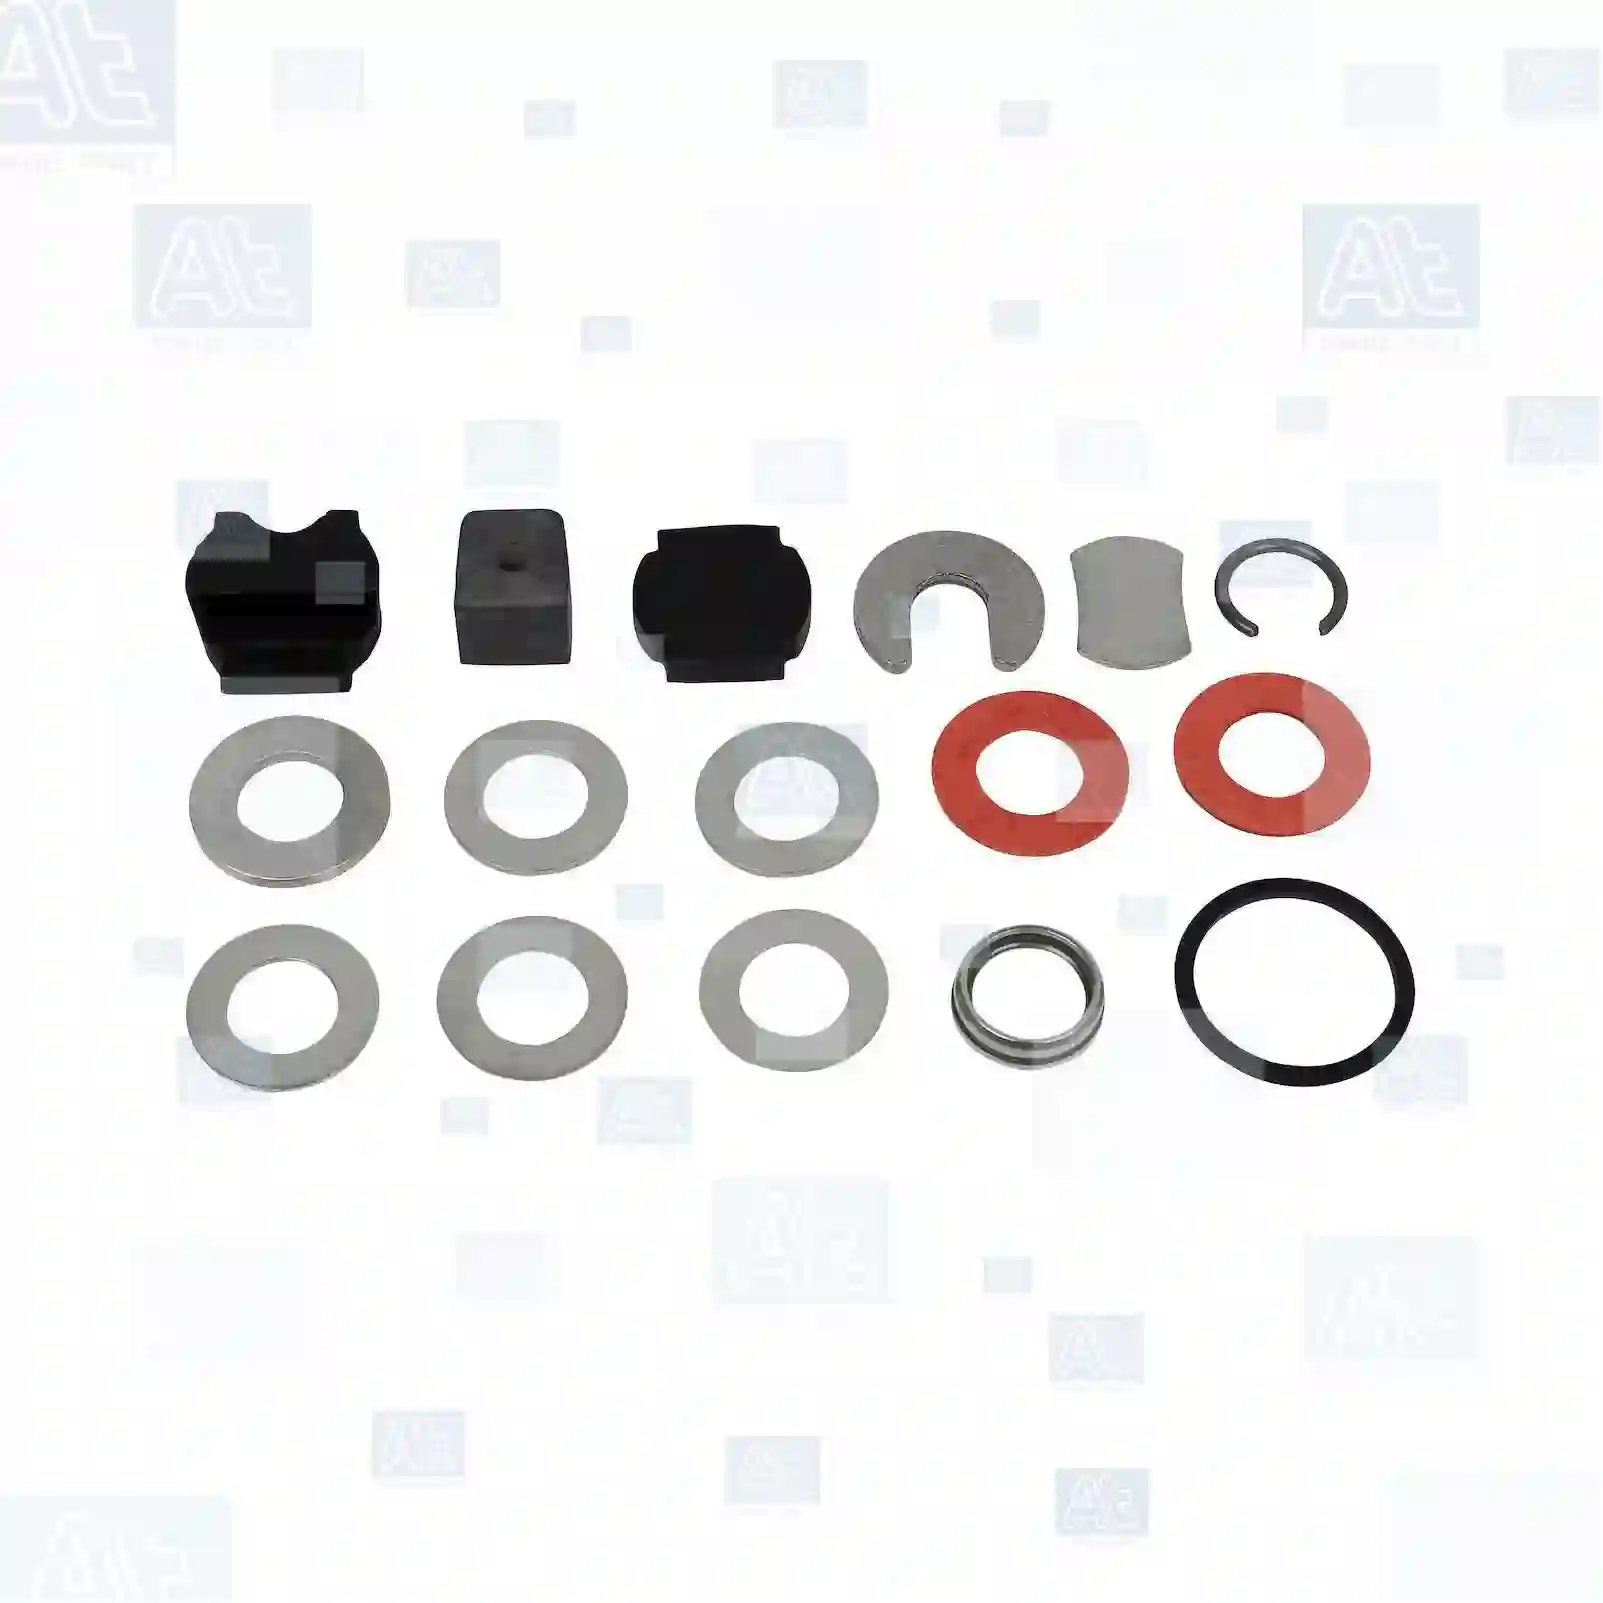 Repair kit, starter, at no 77712249, oem no: 582744, 3870989, 696771, 4791092, 09918362, 09936731, 09959874, 79045355, 1579818, 1596343, 3079555R1, 3079555R91, 79045355, AL23848, AL41522, 01308152, 296190219, 09918362, 09936731, 09959874, 79045355, 81907006001, 0005865615, 23490-9X800, 1203141, 1203142, 28733025, 582744, 5000805266, 296190219, 192023, 0001116588, 409090716, 9405827448, 009918362 At Spare Part | Engine, Accelerator Pedal, Camshaft, Connecting Rod, Crankcase, Crankshaft, Cylinder Head, Engine Suspension Mountings, Exhaust Manifold, Exhaust Gas Recirculation, Filter Kits, Flywheel Housing, General Overhaul Kits, Engine, Intake Manifold, Oil Cleaner, Oil Cooler, Oil Filter, Oil Pump, Oil Sump, Piston & Liner, Sensor & Switch, Timing Case, Turbocharger, Cooling System, Belt Tensioner, Coolant Filter, Coolant Pipe, Corrosion Prevention Agent, Drive, Expansion Tank, Fan, Intercooler, Monitors & Gauges, Radiator, Thermostat, V-Belt / Timing belt, Water Pump, Fuel System, Electronical Injector Unit, Feed Pump, Fuel Filter, cpl., Fuel Gauge Sender,  Fuel Line, Fuel Pump, Fuel Tank, Injection Line Kit, Injection Pump, Exhaust System, Clutch & Pedal, Gearbox, Propeller Shaft, Axles, Brake System, Hubs & Wheels, Suspension, Leaf Spring, Universal Parts / Accessories, Steering, Electrical System, Cabin Repair kit, starter, at no 77712249, oem no: 582744, 3870989, 696771, 4791092, 09918362, 09936731, 09959874, 79045355, 1579818, 1596343, 3079555R1, 3079555R91, 79045355, AL23848, AL41522, 01308152, 296190219, 09918362, 09936731, 09959874, 79045355, 81907006001, 0005865615, 23490-9X800, 1203141, 1203142, 28733025, 582744, 5000805266, 296190219, 192023, 0001116588, 409090716, 9405827448, 009918362 At Spare Part | Engine, Accelerator Pedal, Camshaft, Connecting Rod, Crankcase, Crankshaft, Cylinder Head, Engine Suspension Mountings, Exhaust Manifold, Exhaust Gas Recirculation, Filter Kits, Flywheel Housing, General Overhaul Kits, Engine, Intake Manifold, Oil Cleaner, Oil Cooler, Oil Filter, Oil Pump, Oil Sump, Piston & Liner, Sensor & Switch, Timing Case, Turbocharger, Cooling System, Belt Tensioner, Coolant Filter, Coolant Pipe, Corrosion Prevention Agent, Drive, Expansion Tank, Fan, Intercooler, Monitors & Gauges, Radiator, Thermostat, V-Belt / Timing belt, Water Pump, Fuel System, Electronical Injector Unit, Feed Pump, Fuel Filter, cpl., Fuel Gauge Sender,  Fuel Line, Fuel Pump, Fuel Tank, Injection Line Kit, Injection Pump, Exhaust System, Clutch & Pedal, Gearbox, Propeller Shaft, Axles, Brake System, Hubs & Wheels, Suspension, Leaf Spring, Universal Parts / Accessories, Steering, Electrical System, Cabin